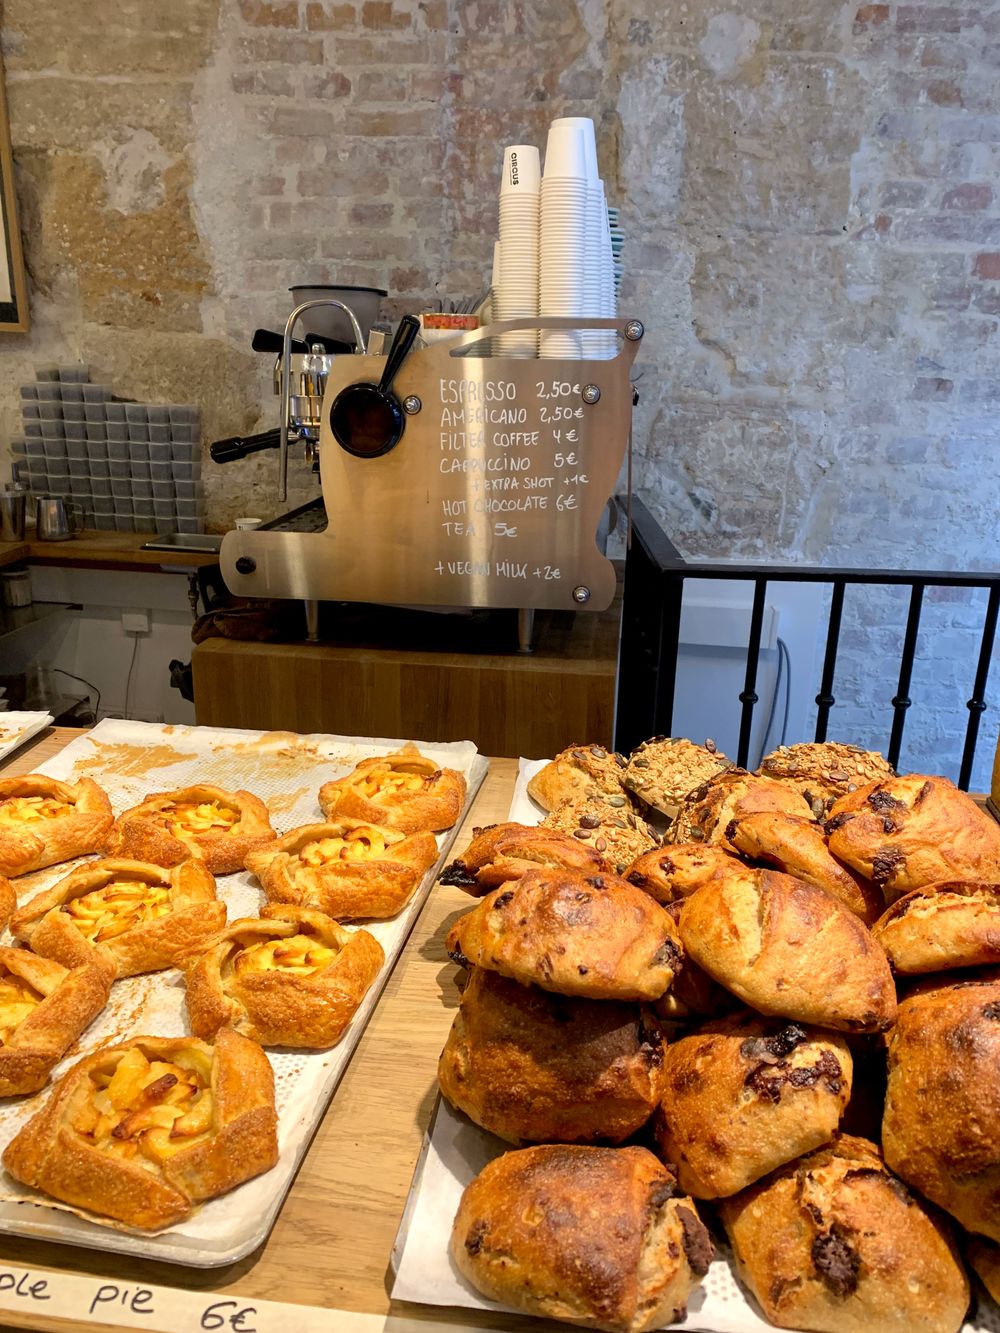 Circus Bakery Paris specialty coffee and cinnamon buns on the left bank